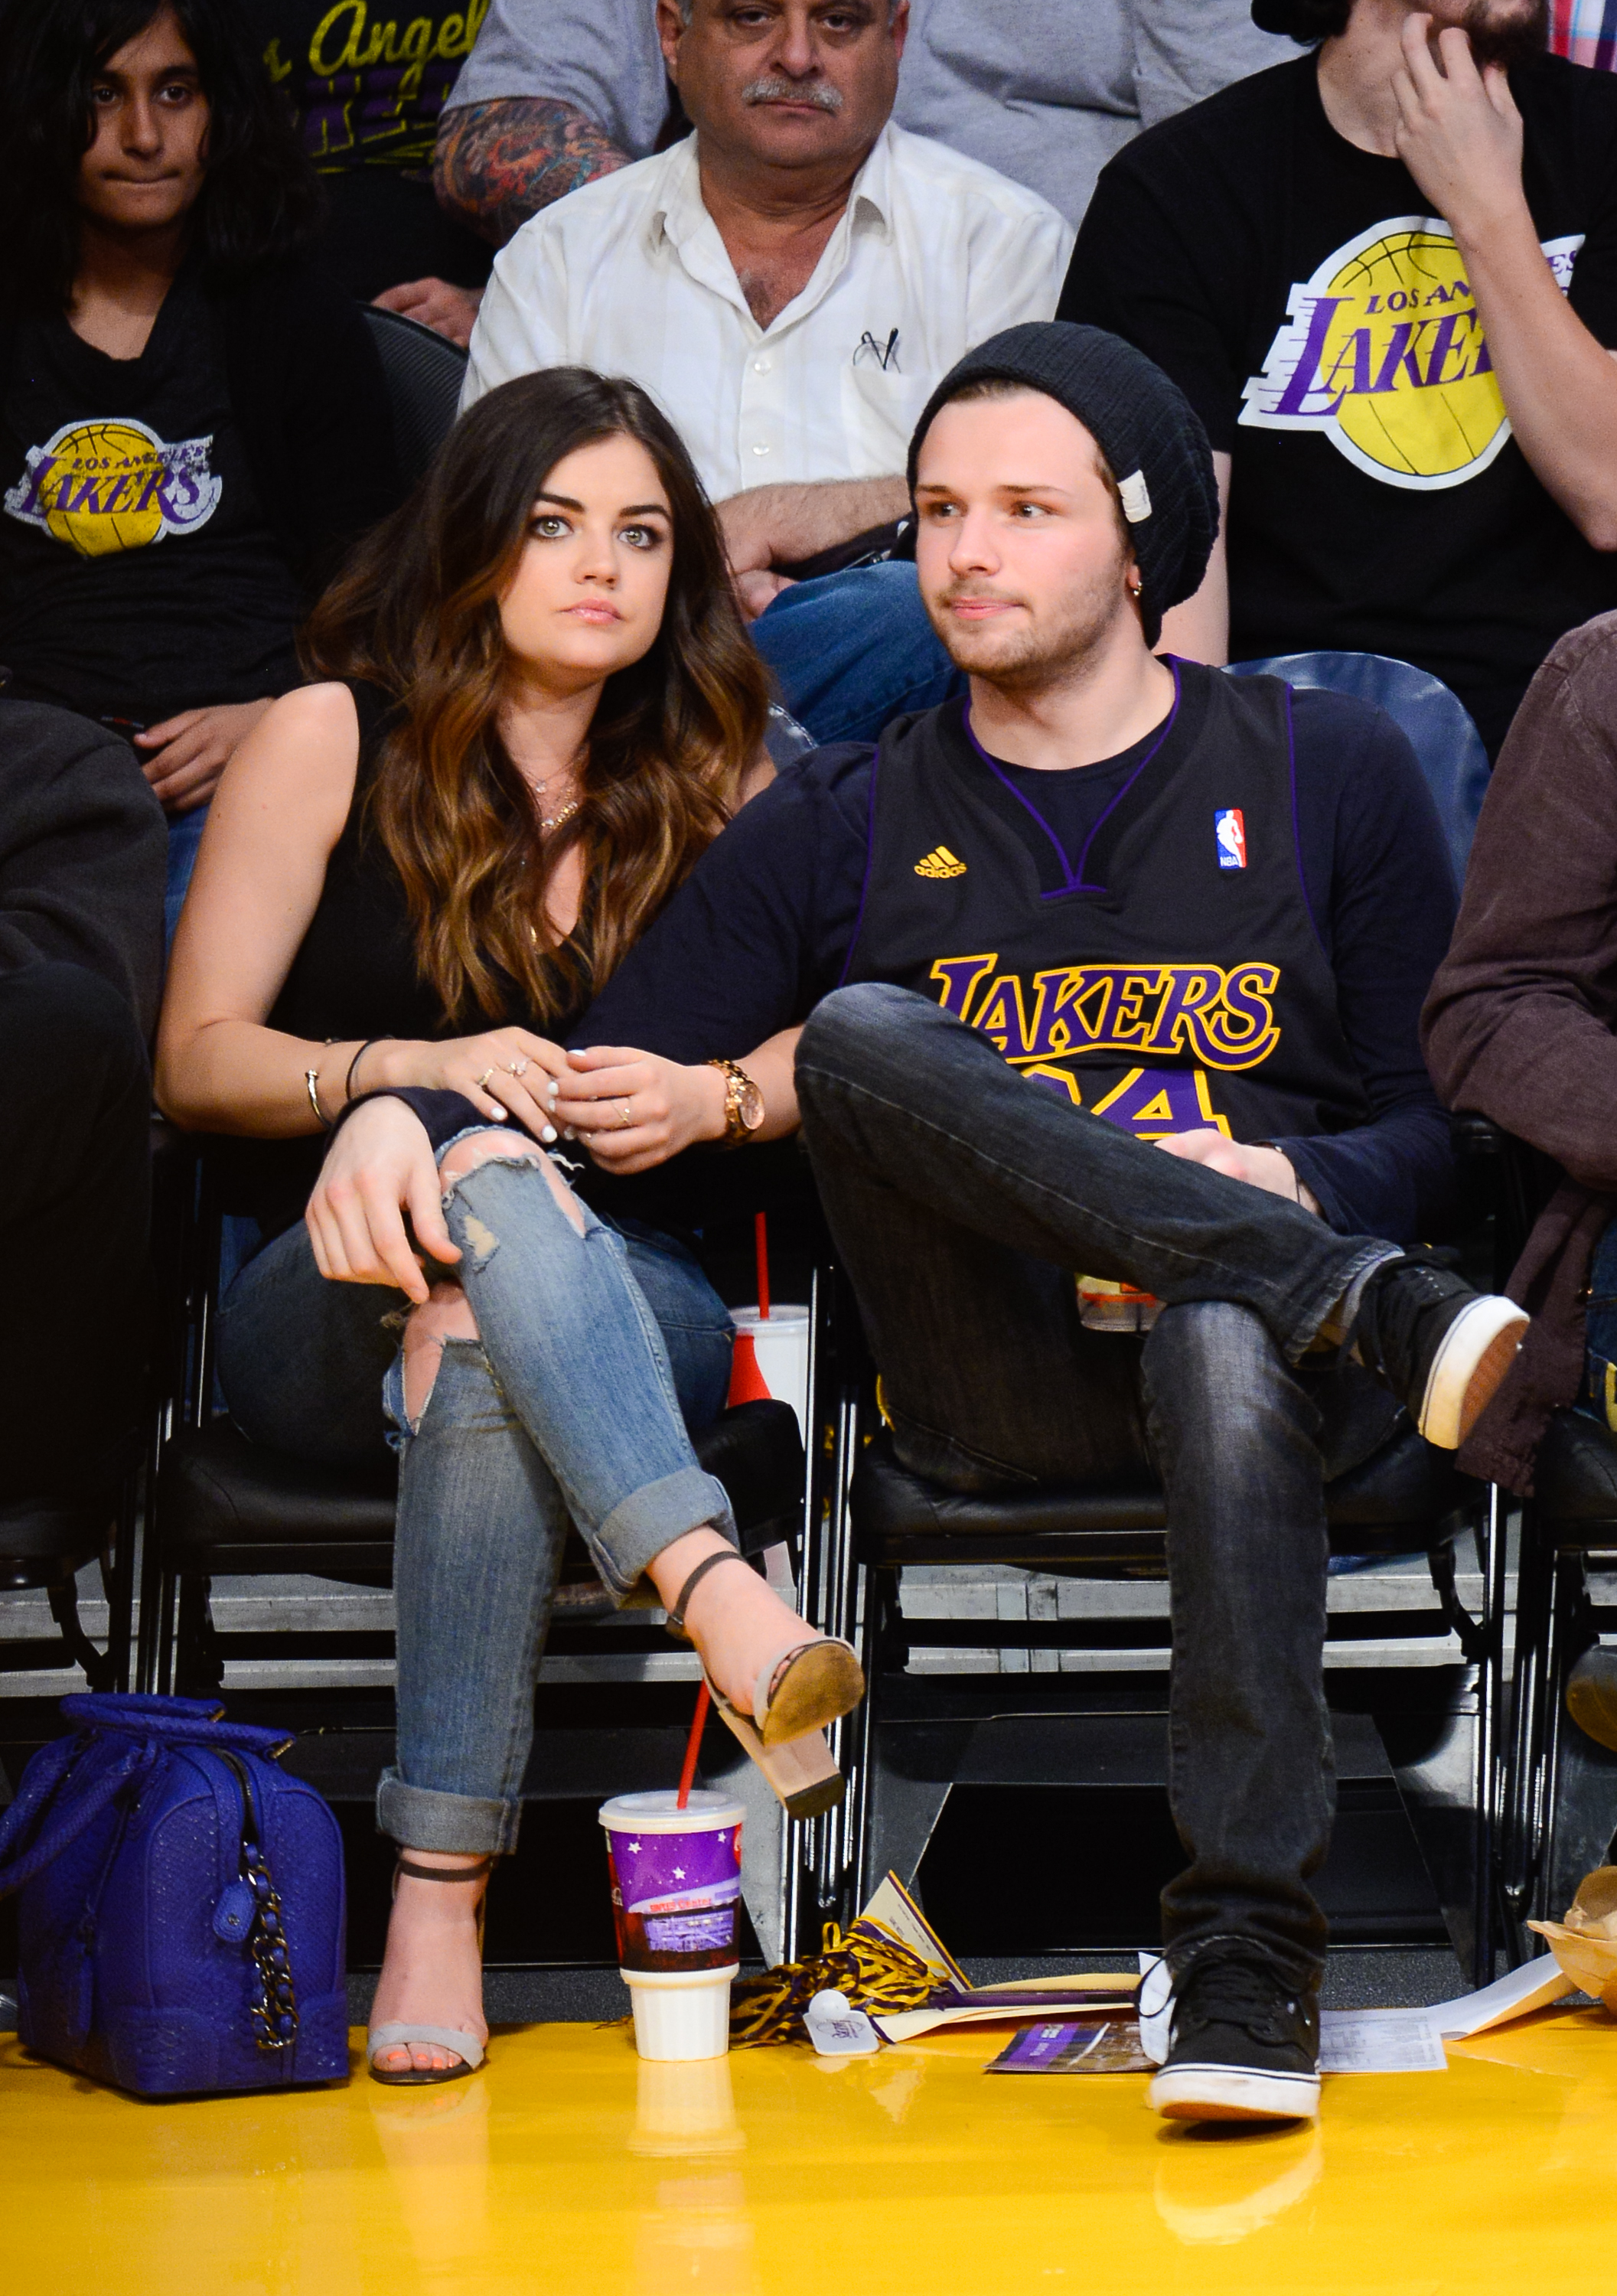 Lucy Hale and Joel Crouse sitting courtside at a basketball game between the Memphis Grizzlies and the Los Angeles Lakers at Staples Center on April 13, 2014